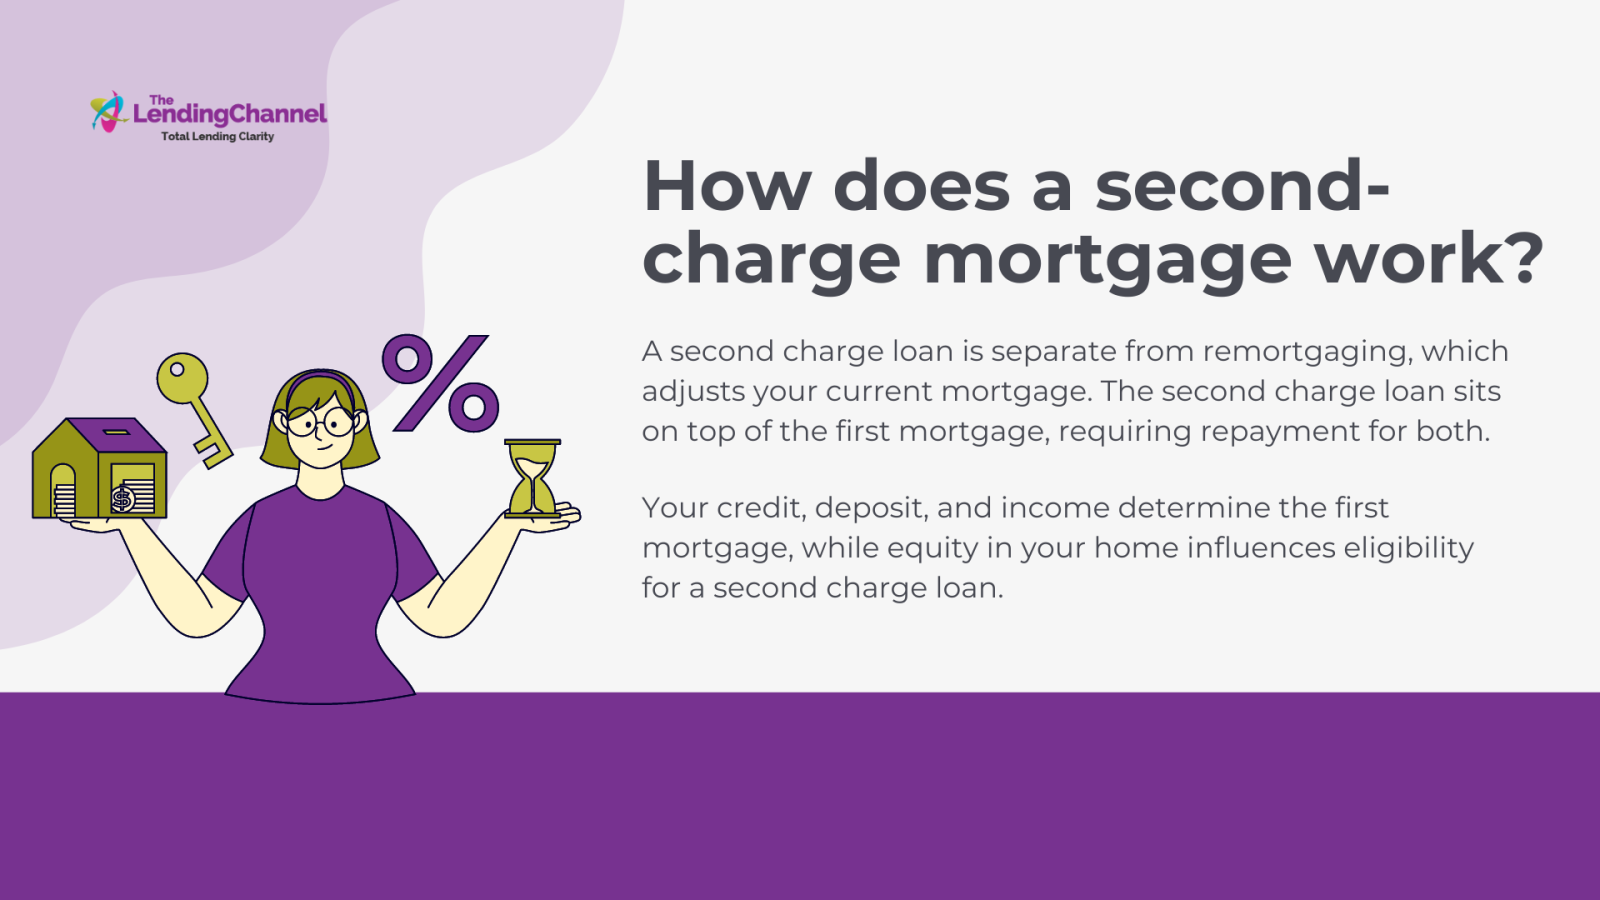 How does a second charge mortgage work?